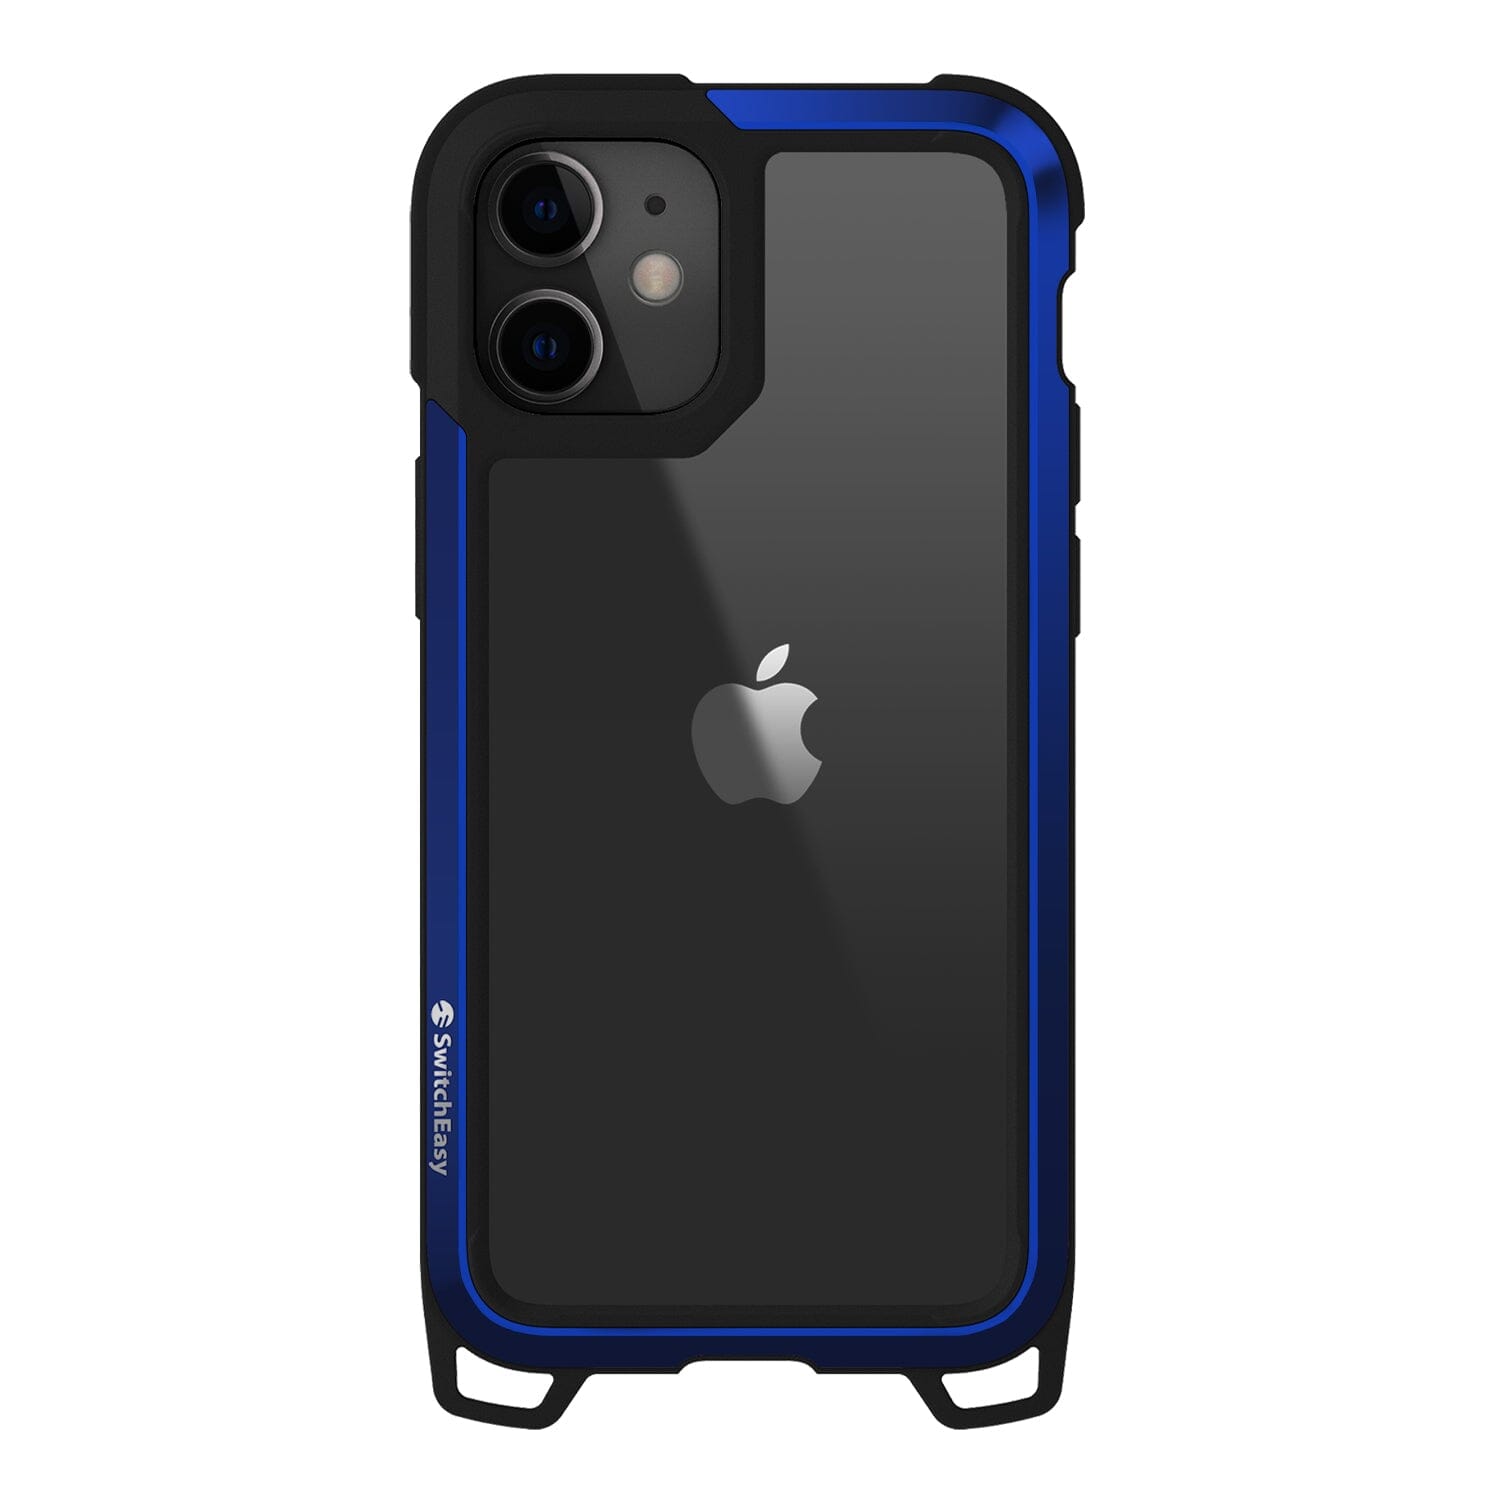 SwitchEasy Odyssey Case for iPhone 12 Series iPhone 12 Series SwitchEasy Navy Blue iPhone 12 Mini 5.4" 